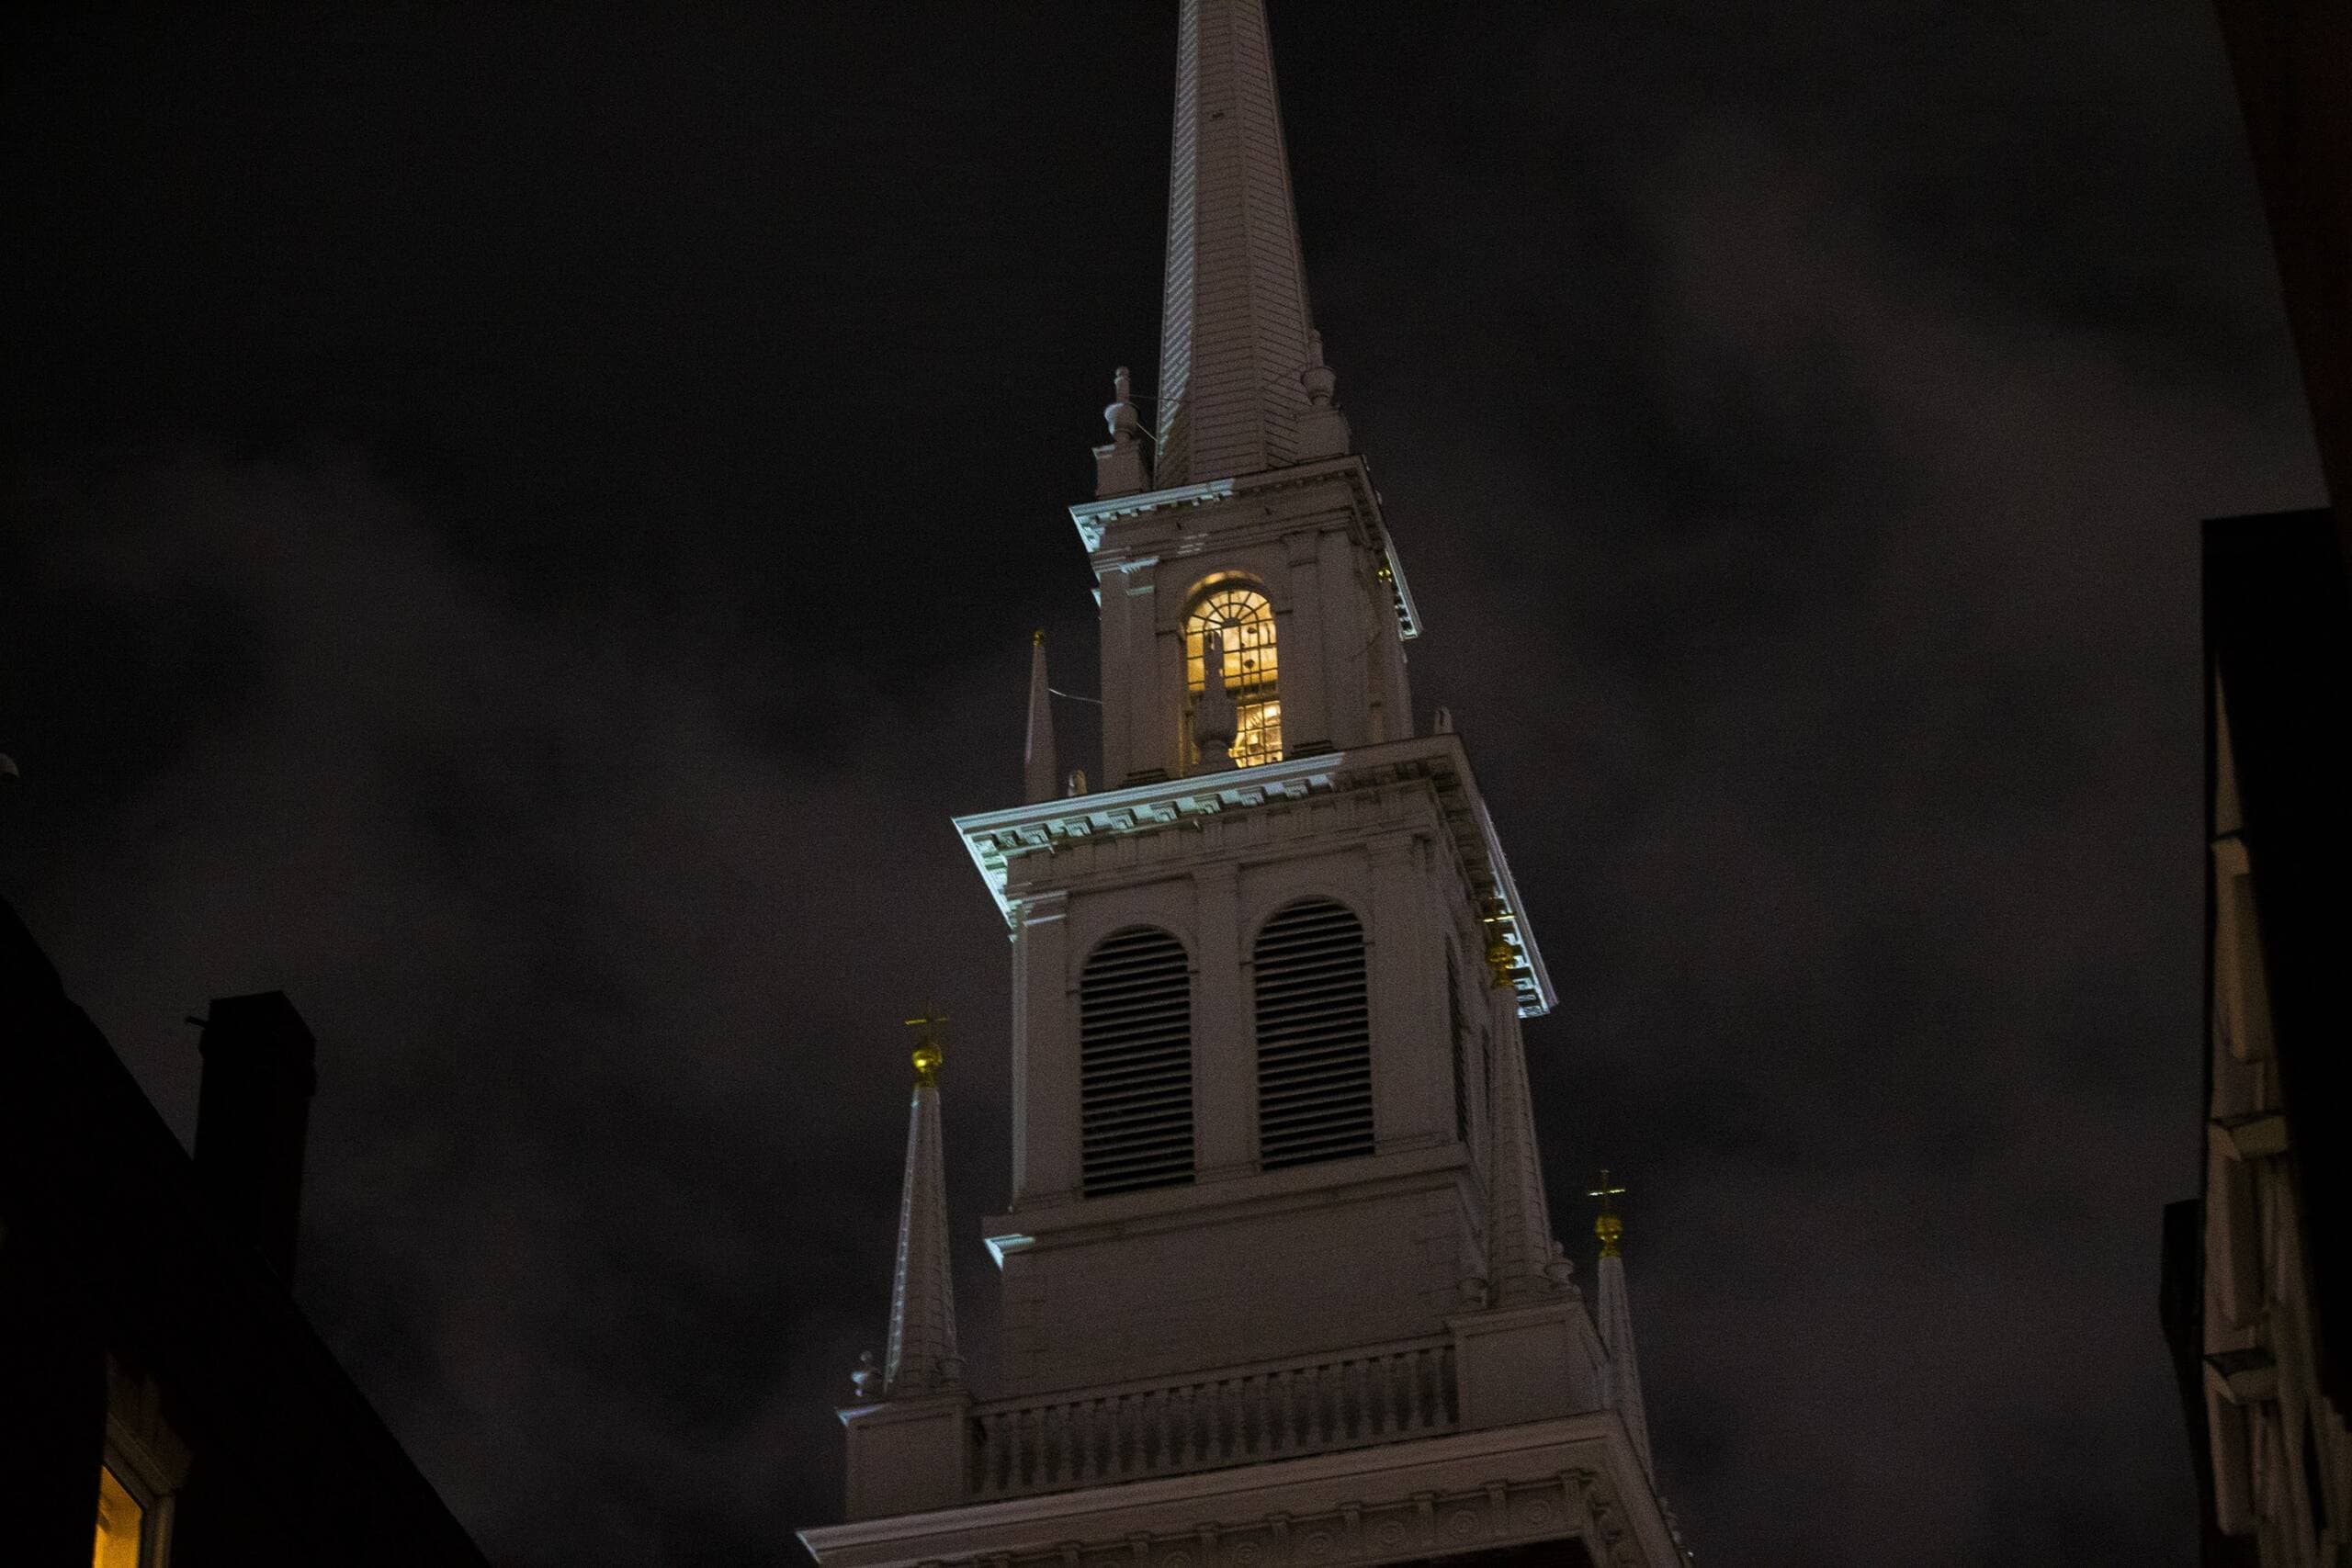 The lanterns are lit in the Old North Church on Jan. 5, 2022. (Jesse Costa/WBUR)